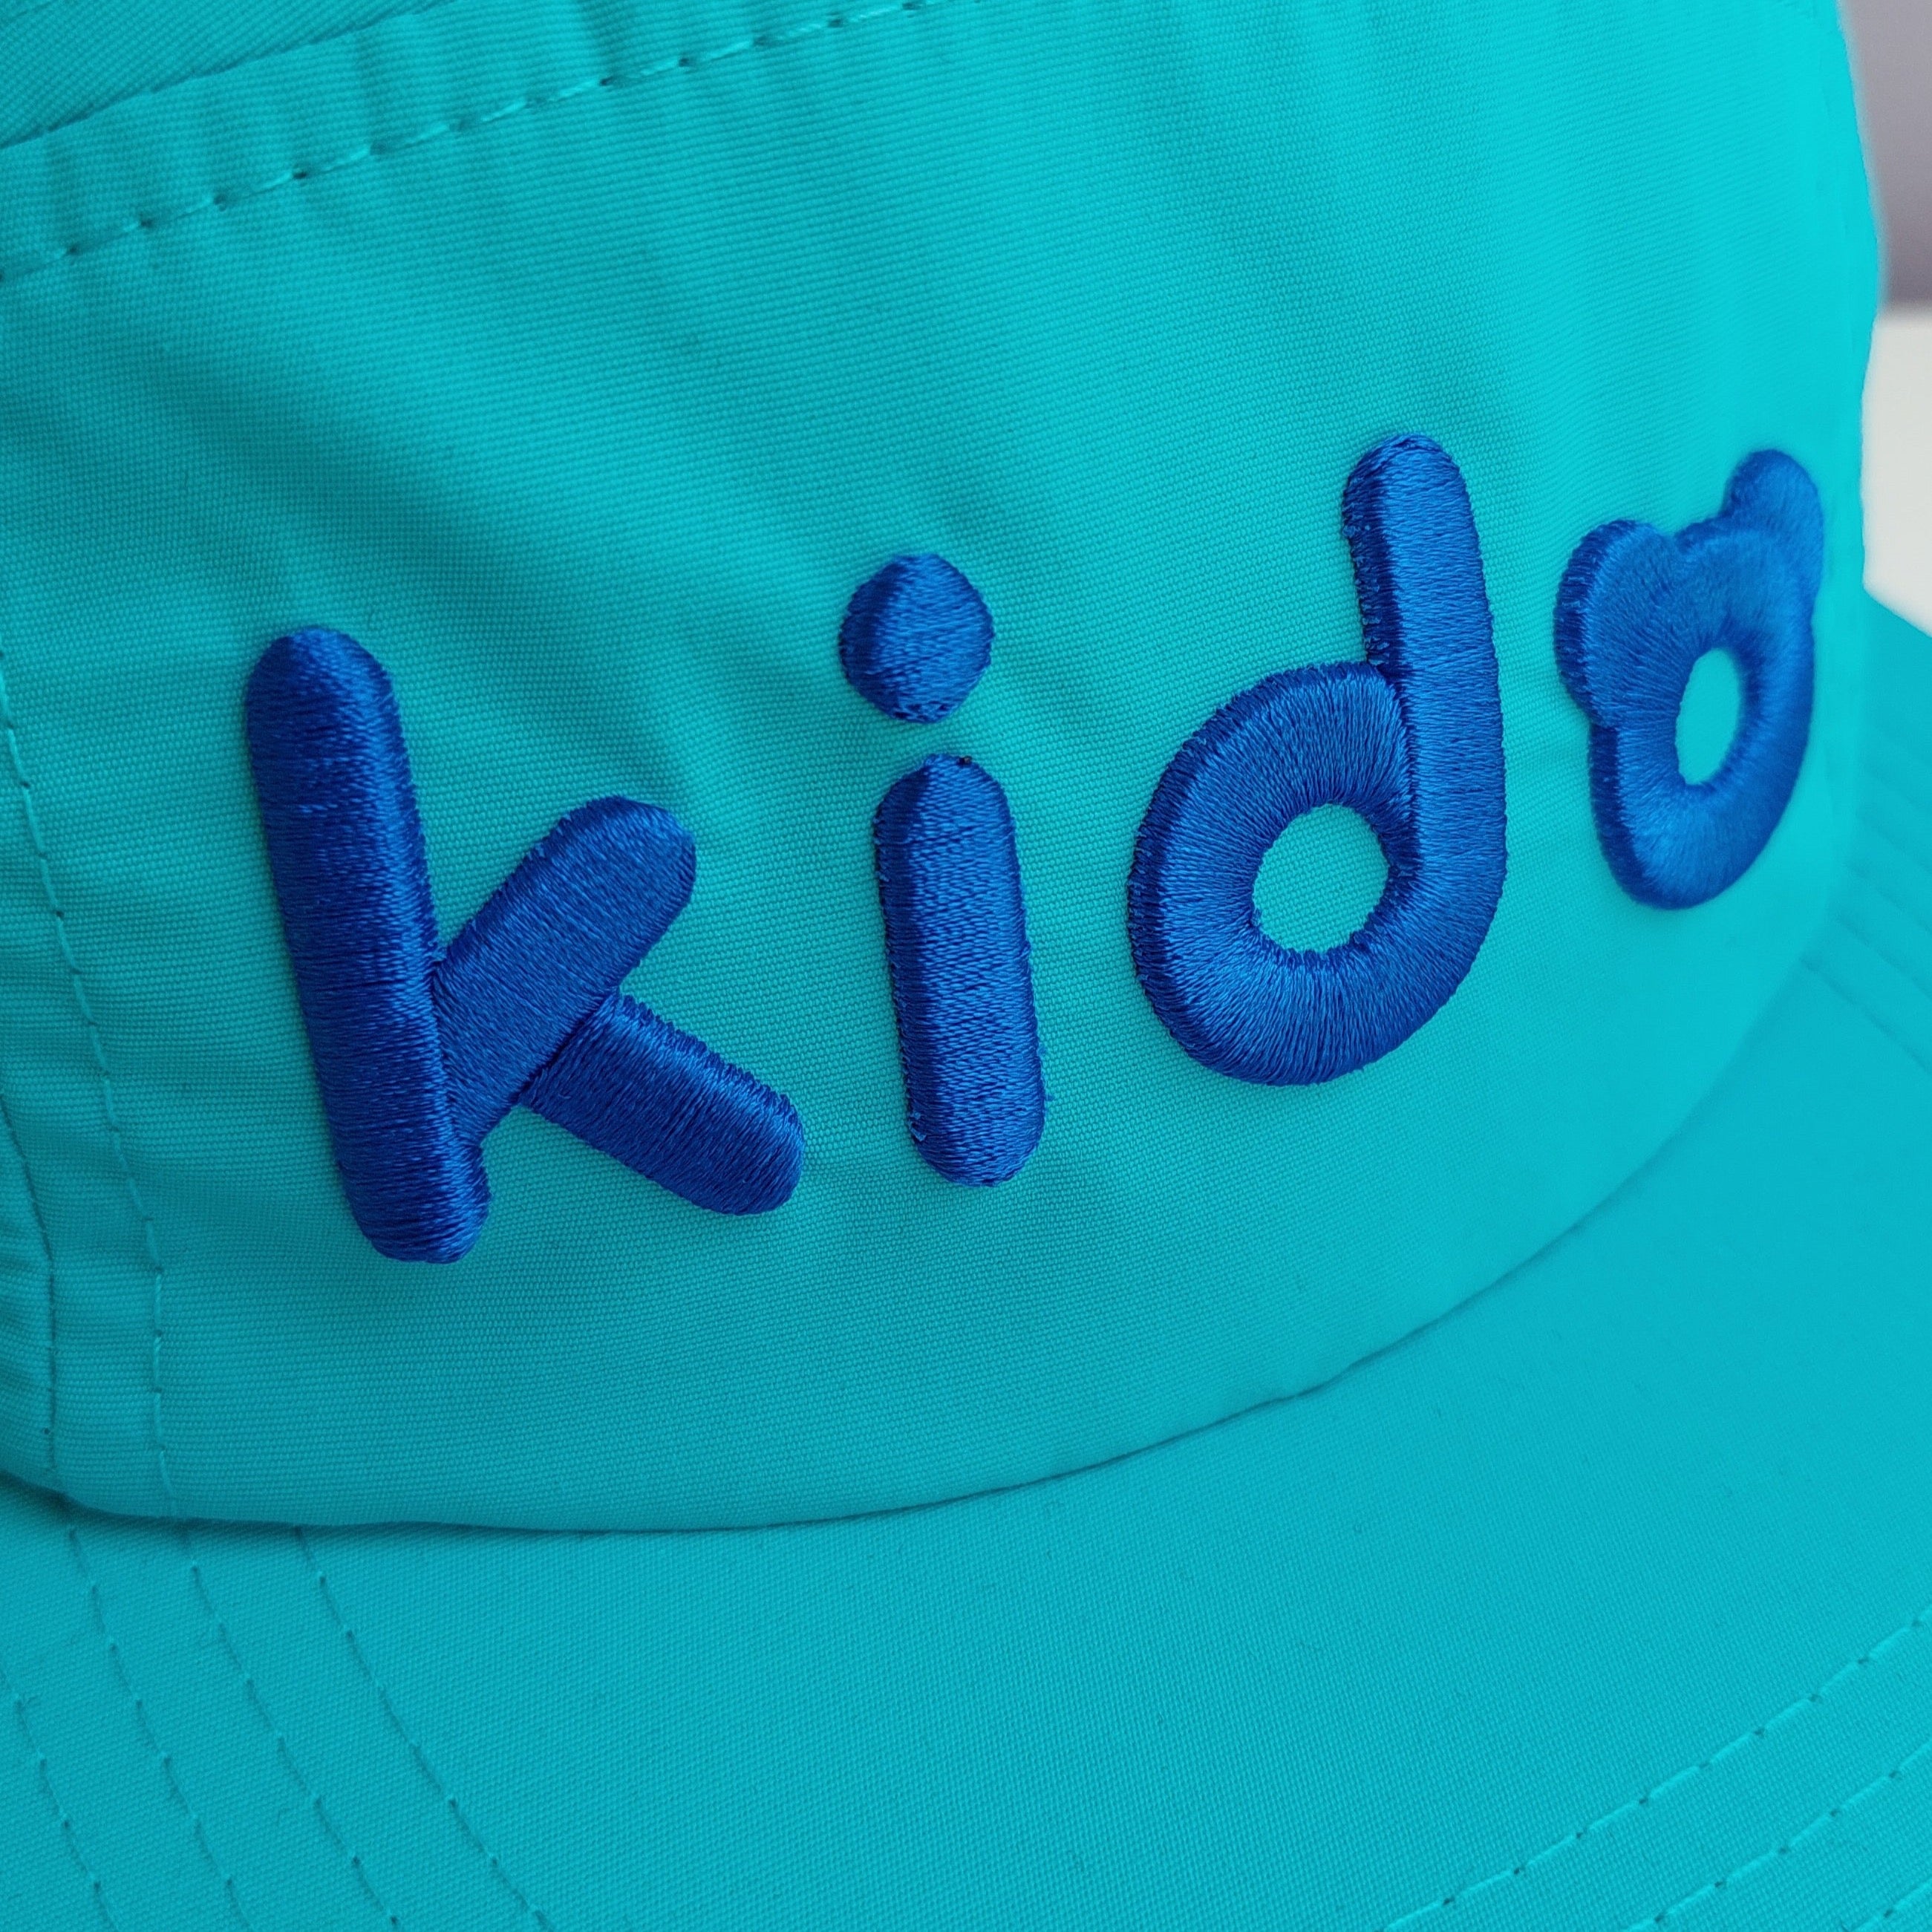 A close up of A bright blue 5 panel cap turned at a 45 degree angle sits on a white surface with a light purple background. The Kido logo is embroidered across the front in darker blue thread.